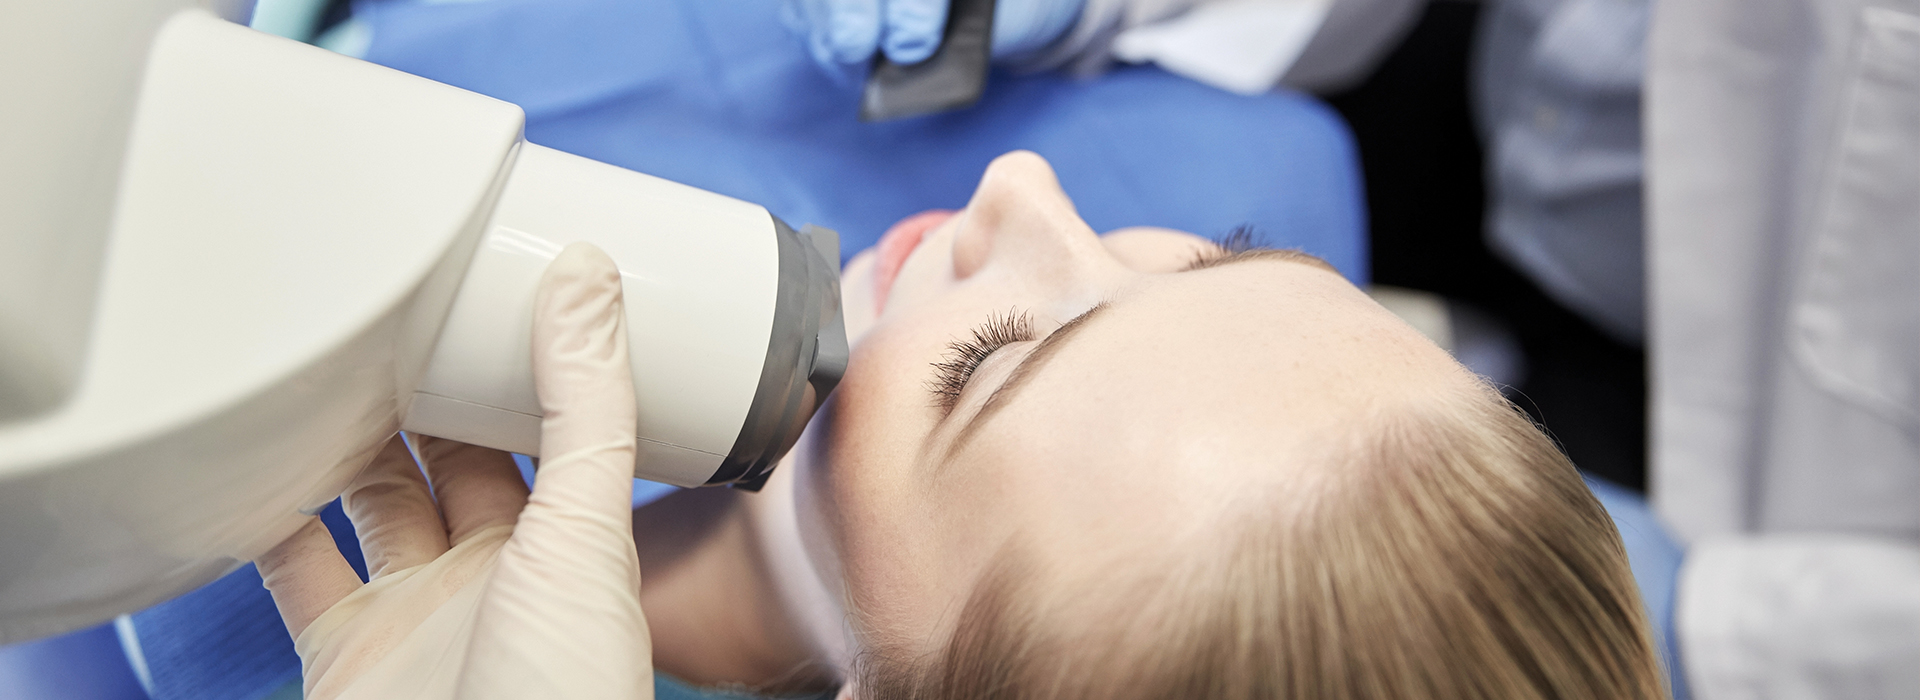 Park Street Dental Associates | Root Canals, Ceramic Crowns and TMJ Disorders